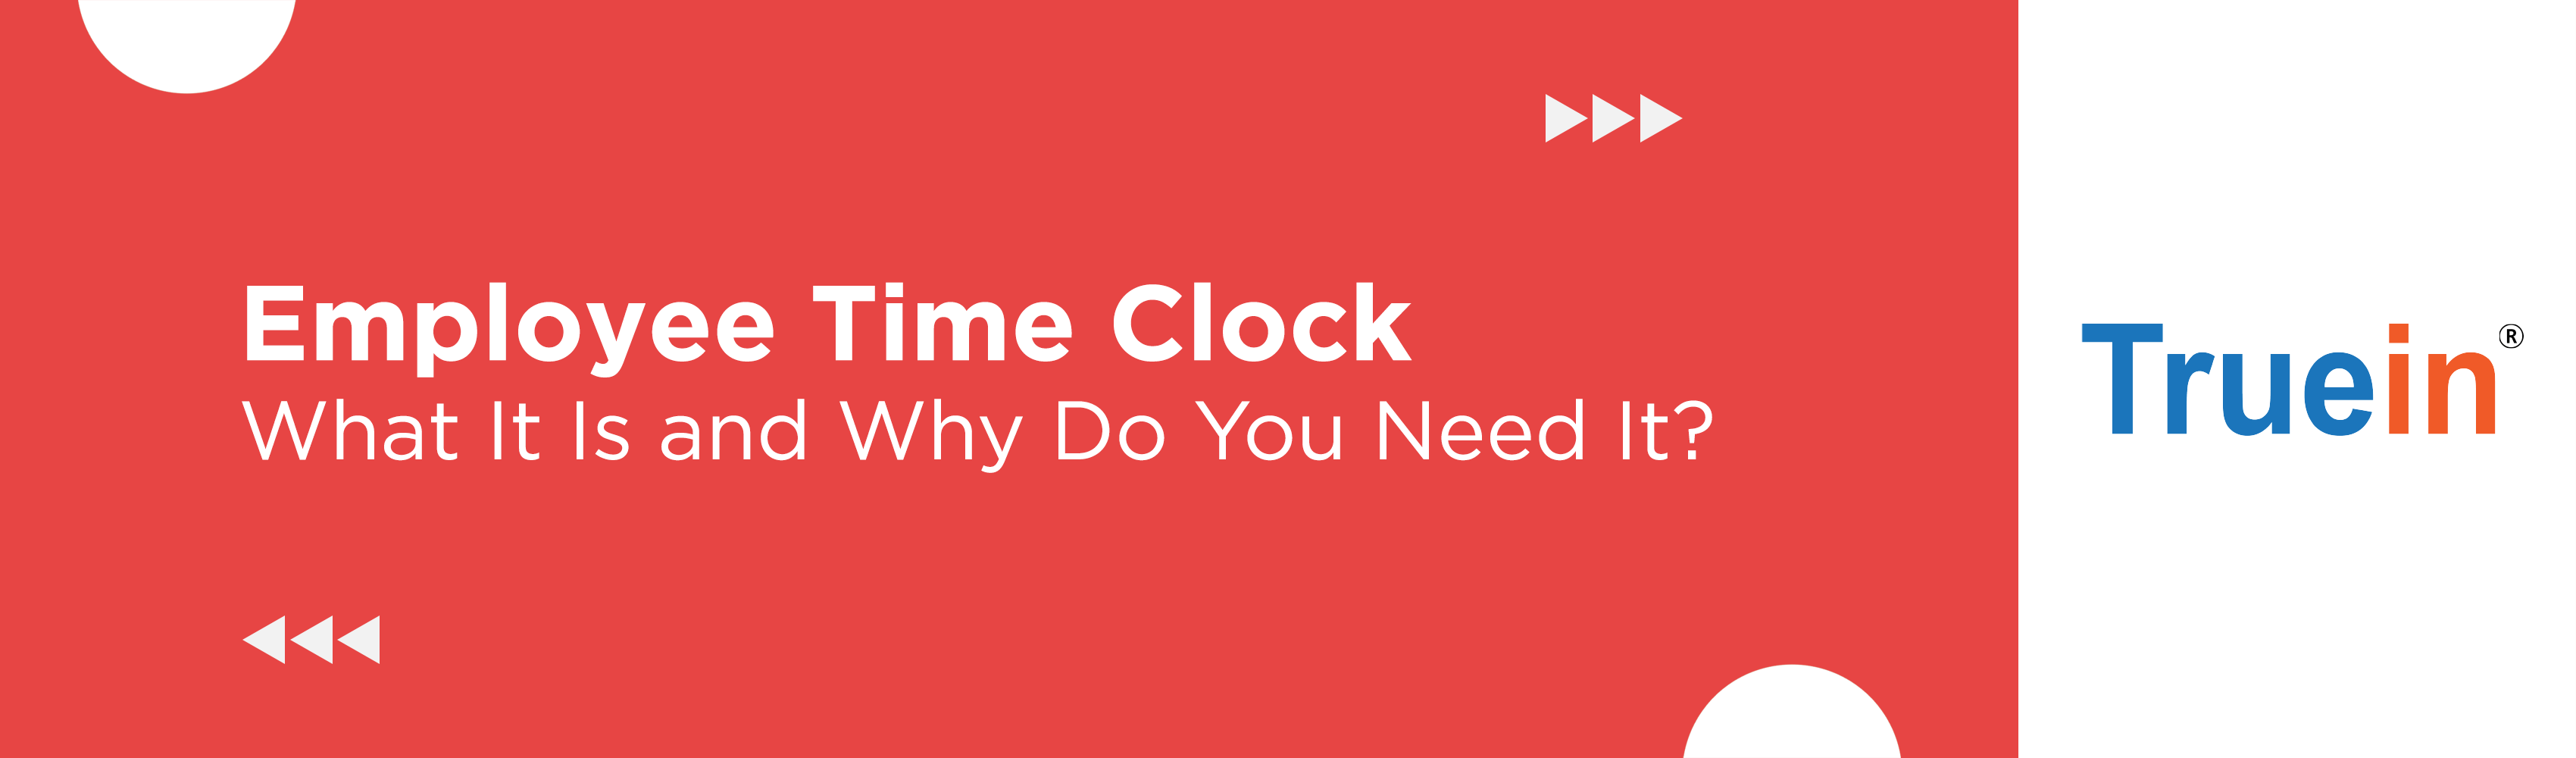 What Is An Employee Time Clock and Why Do You Need It?